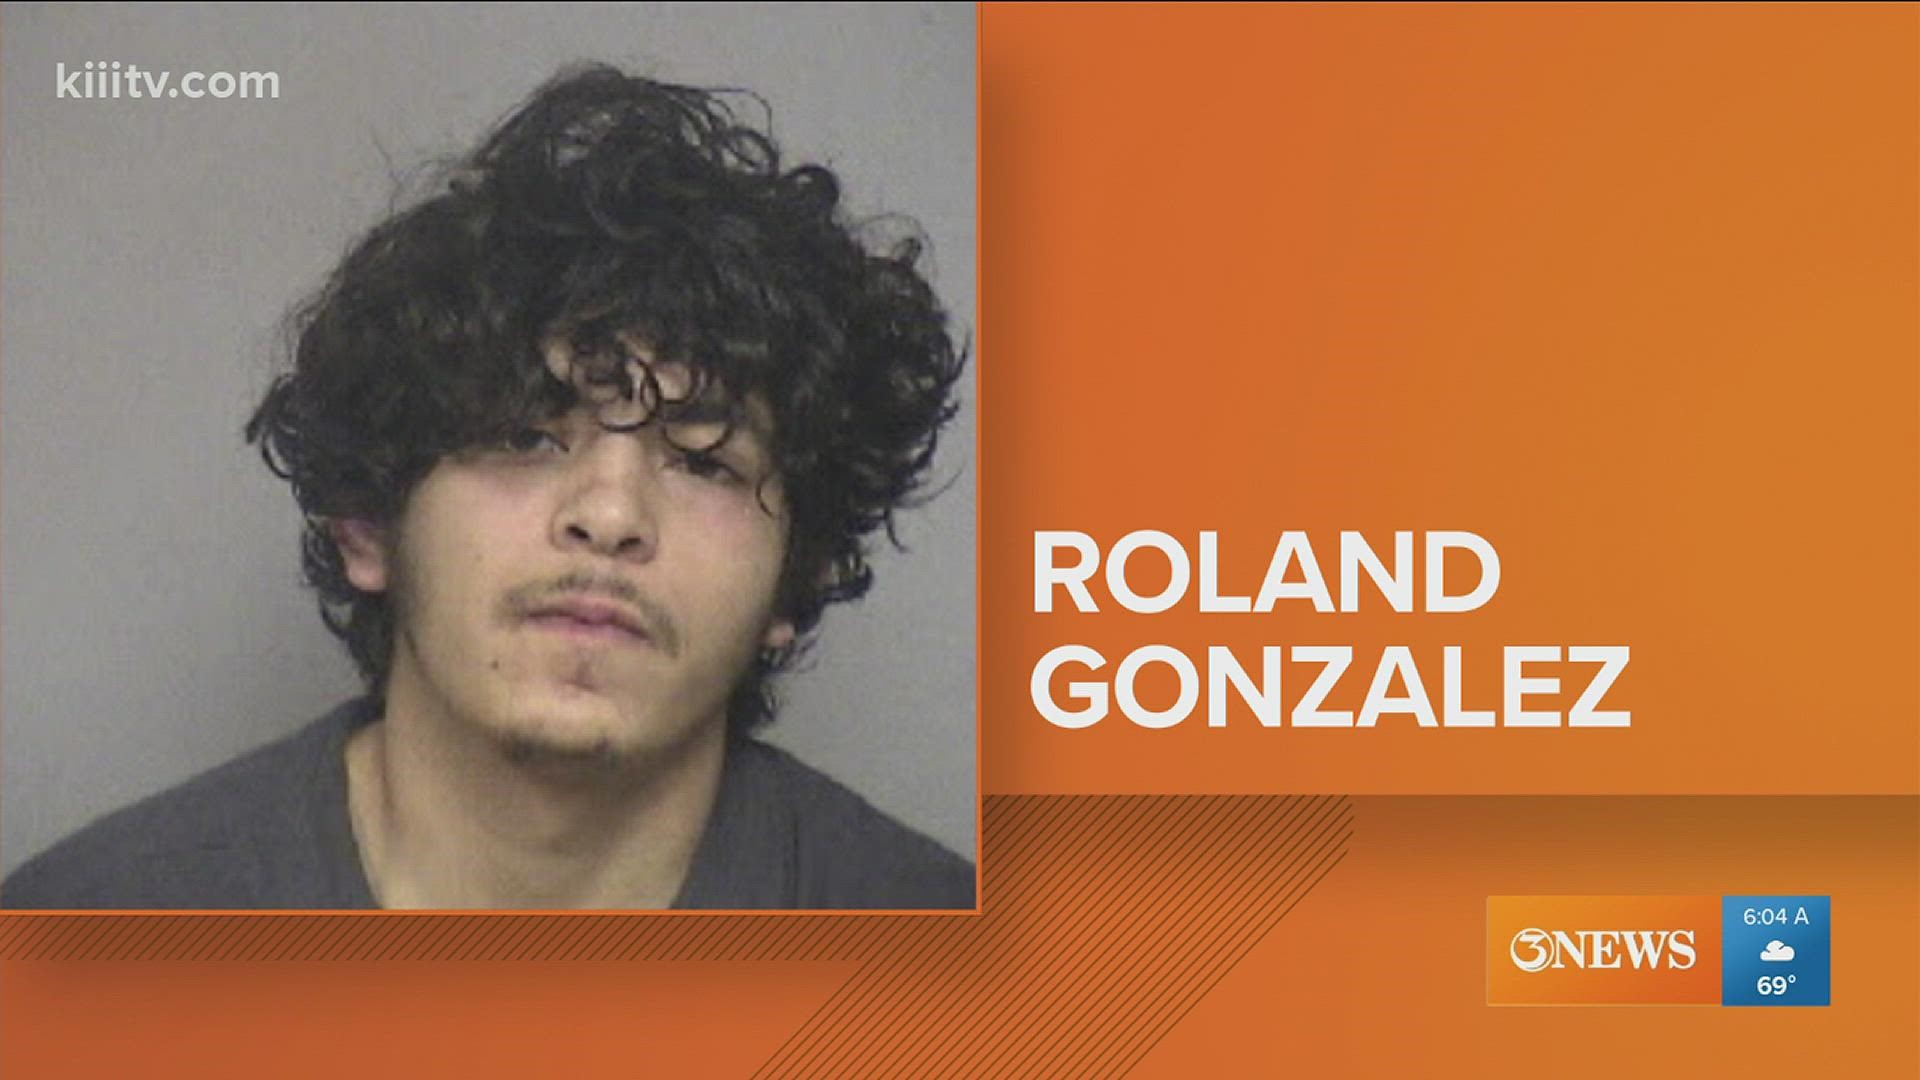 Roland Gonzalez, 23, is wanted on an outstanding assault warrant. Please contact authorities if you have any information on his whereabouts.